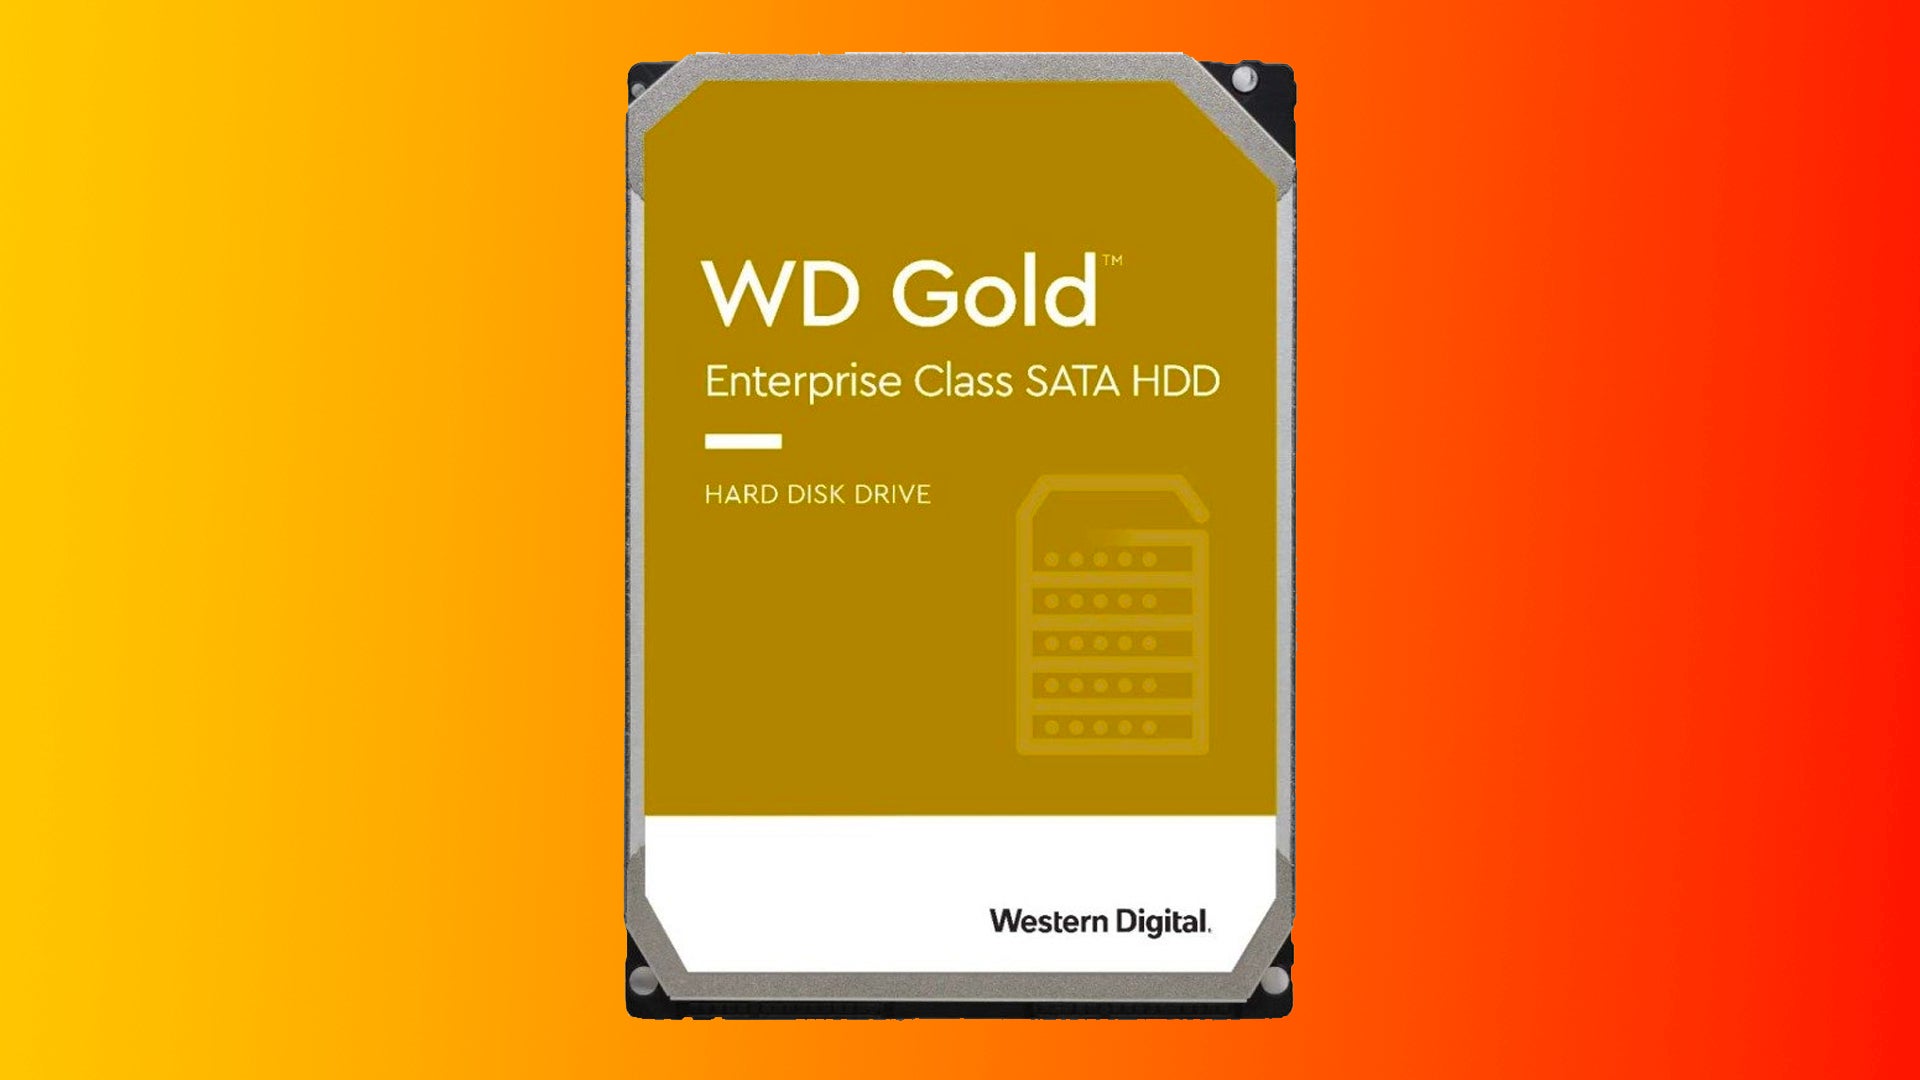 Image for This massive WD Gold 14TB HDD is just £250 at eBuyer right now